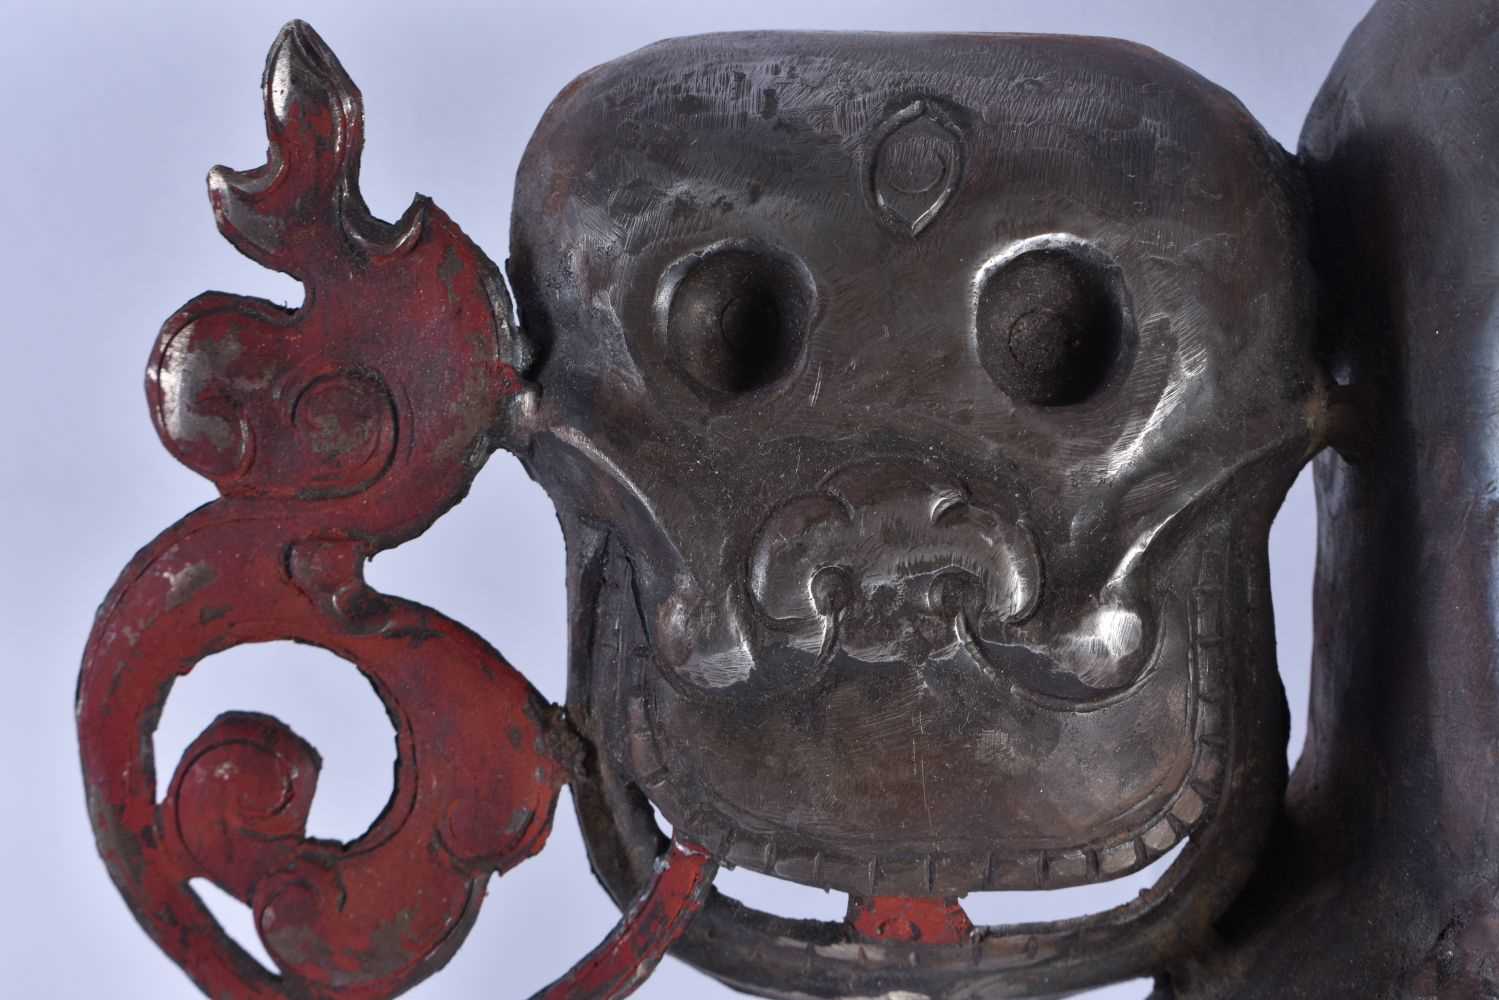 A LARGE 18TH CENTURY CHINESE TIBETAN MIXED METAL POLYCHROMED MASK. 44 cm x 42 cm. - Image 4 of 5